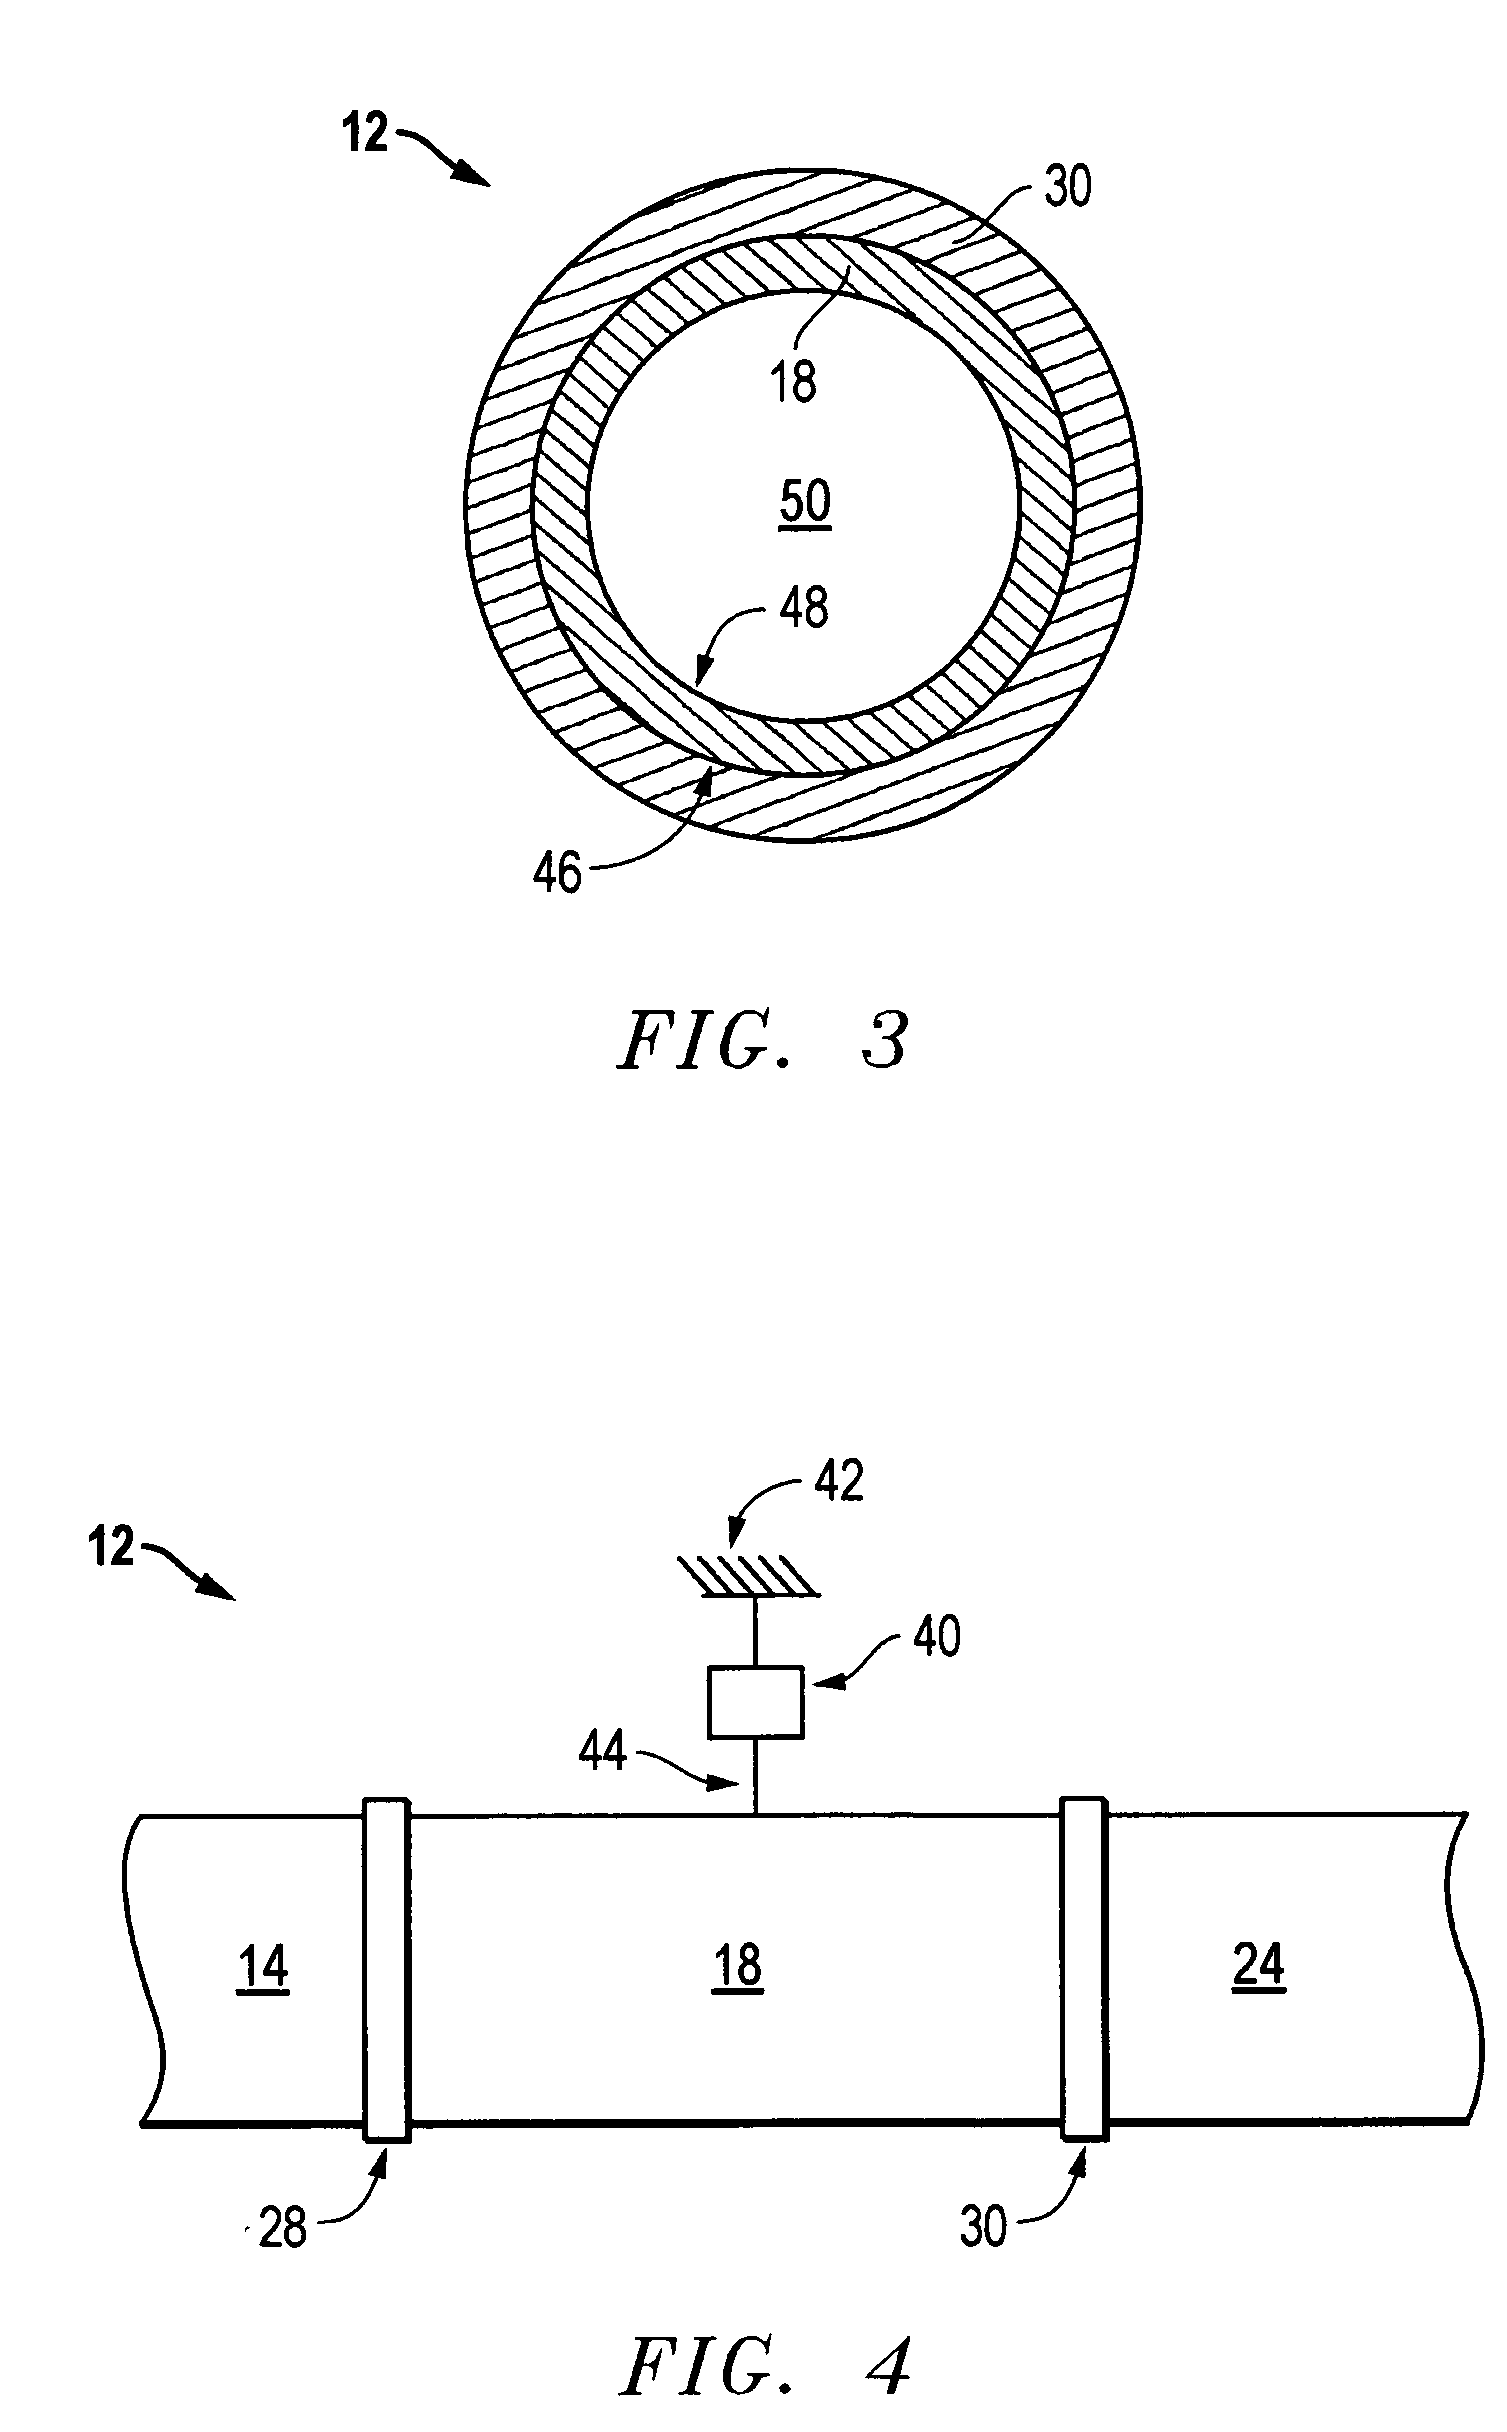 Density measuring apparatus containing a densimeter and a method of using the same in a pipeline